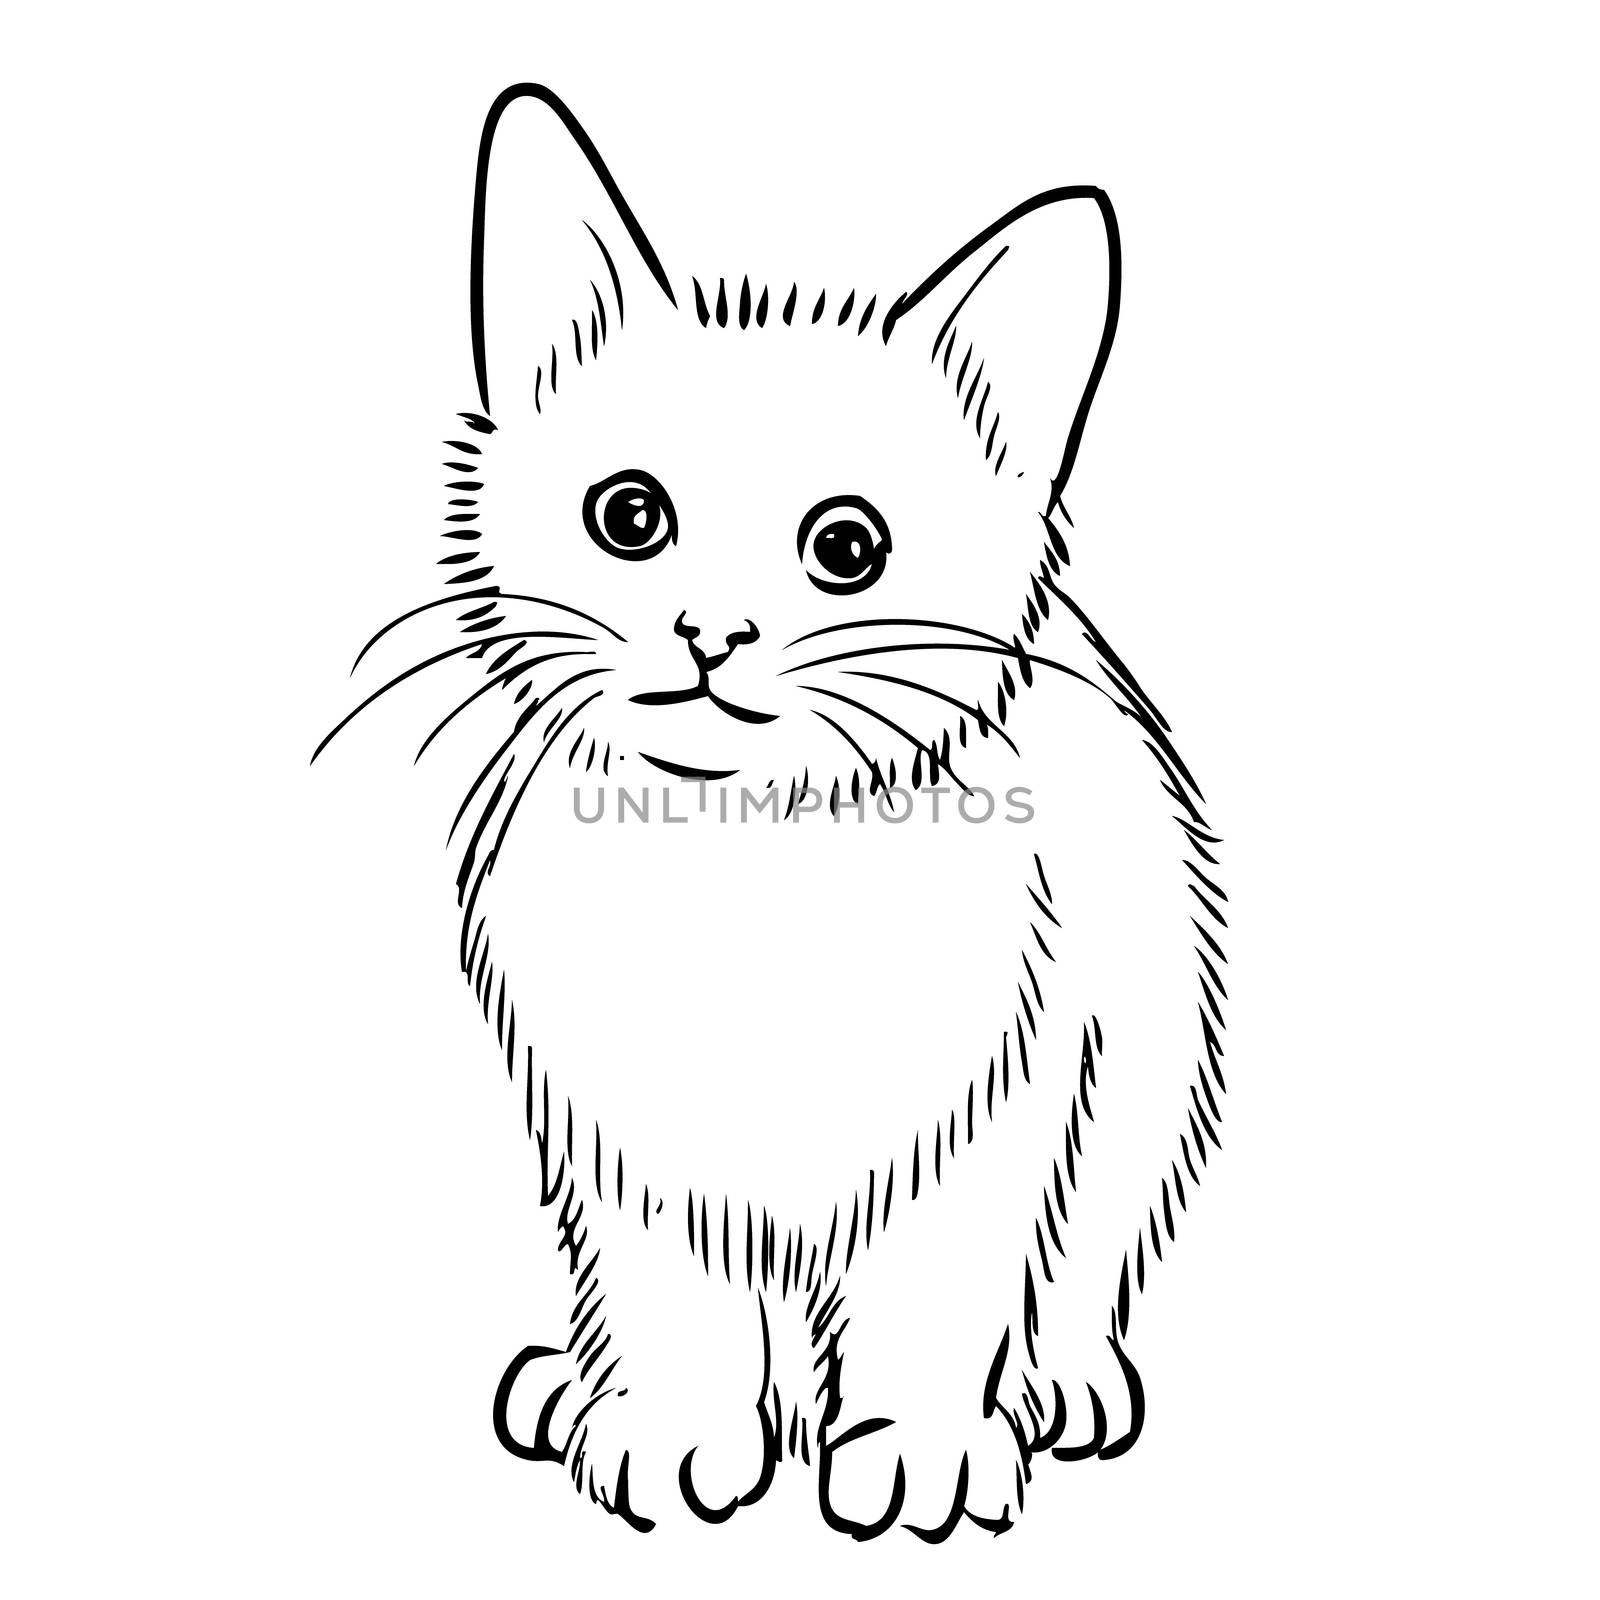 freehand sketch illustration of little cat, kitten doodle hand drawn